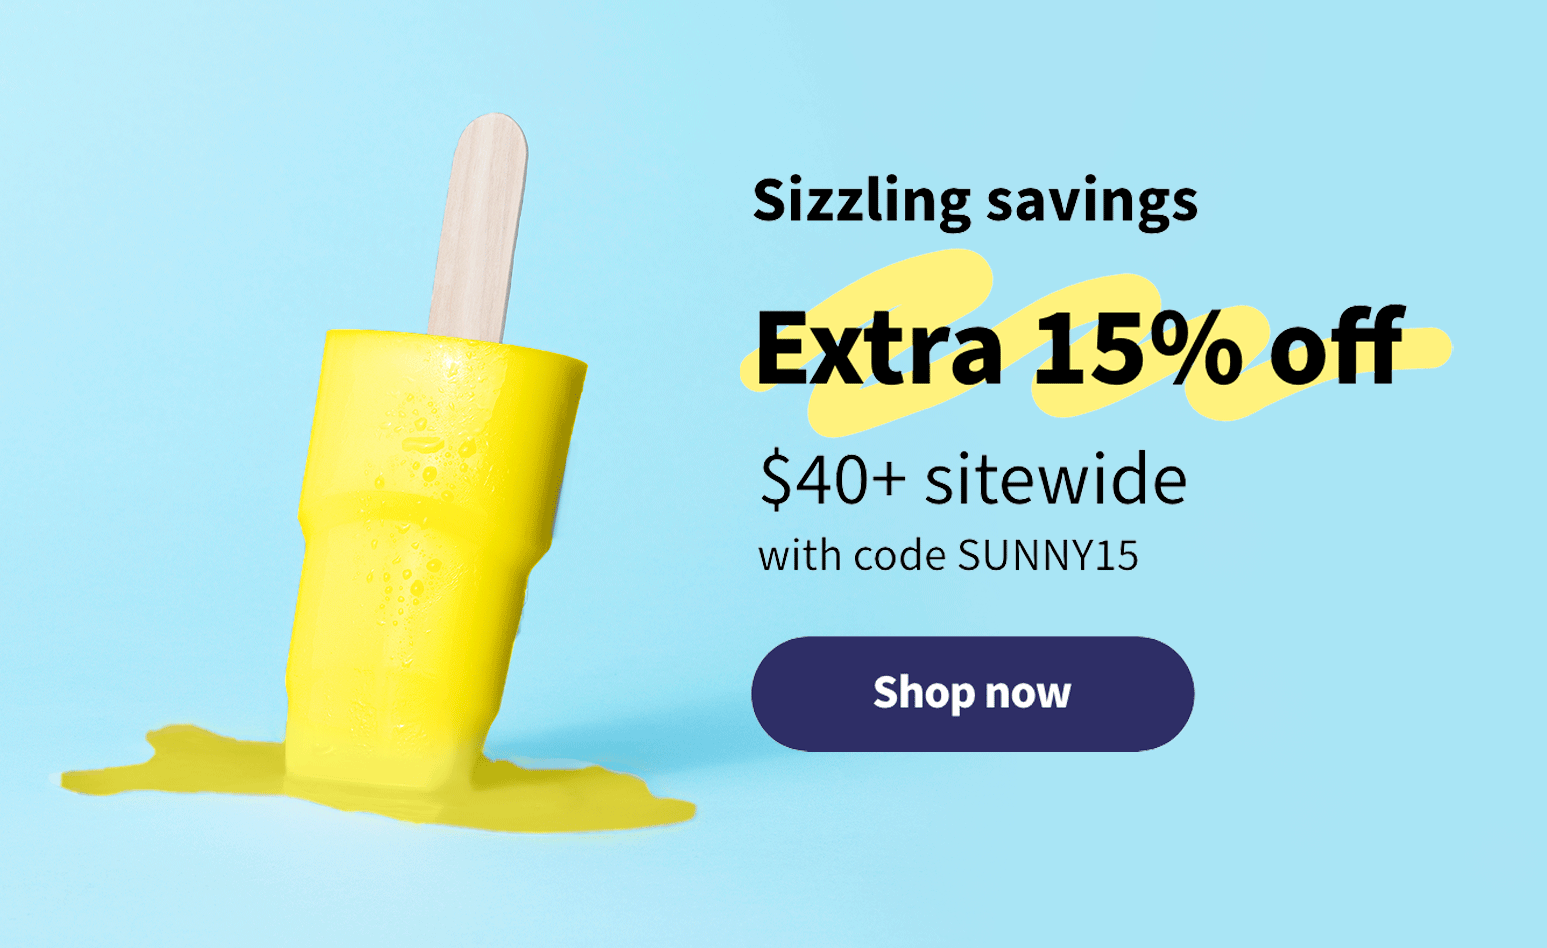 Keep summer going. Extra 15% off $40+ sitewide with code SUNNY15. Shop now.